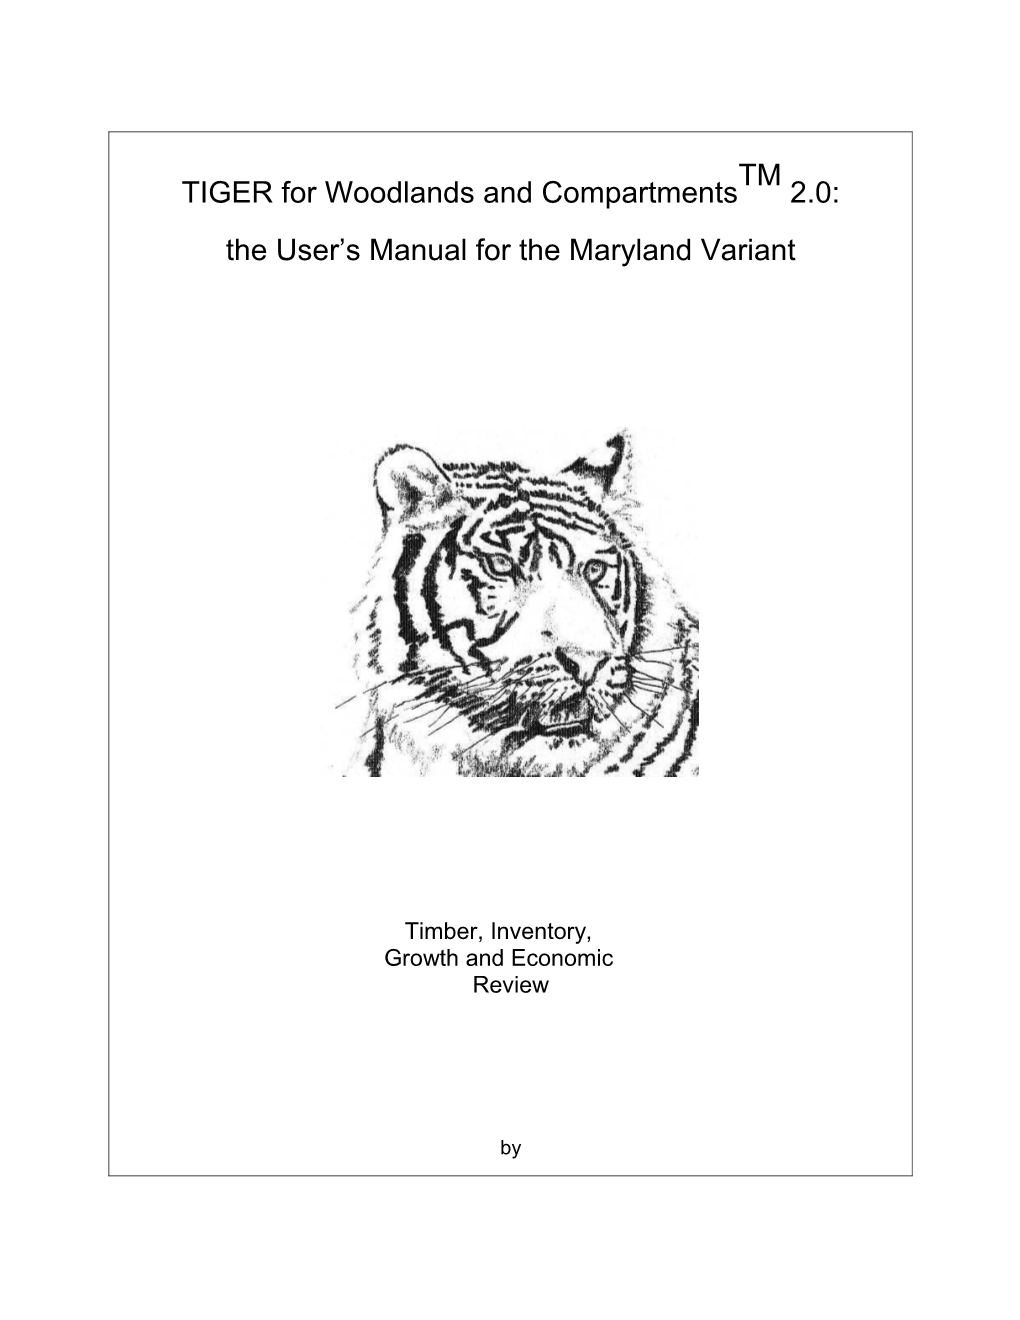 TIGER for Woodlands and Compartmentstm 2.0